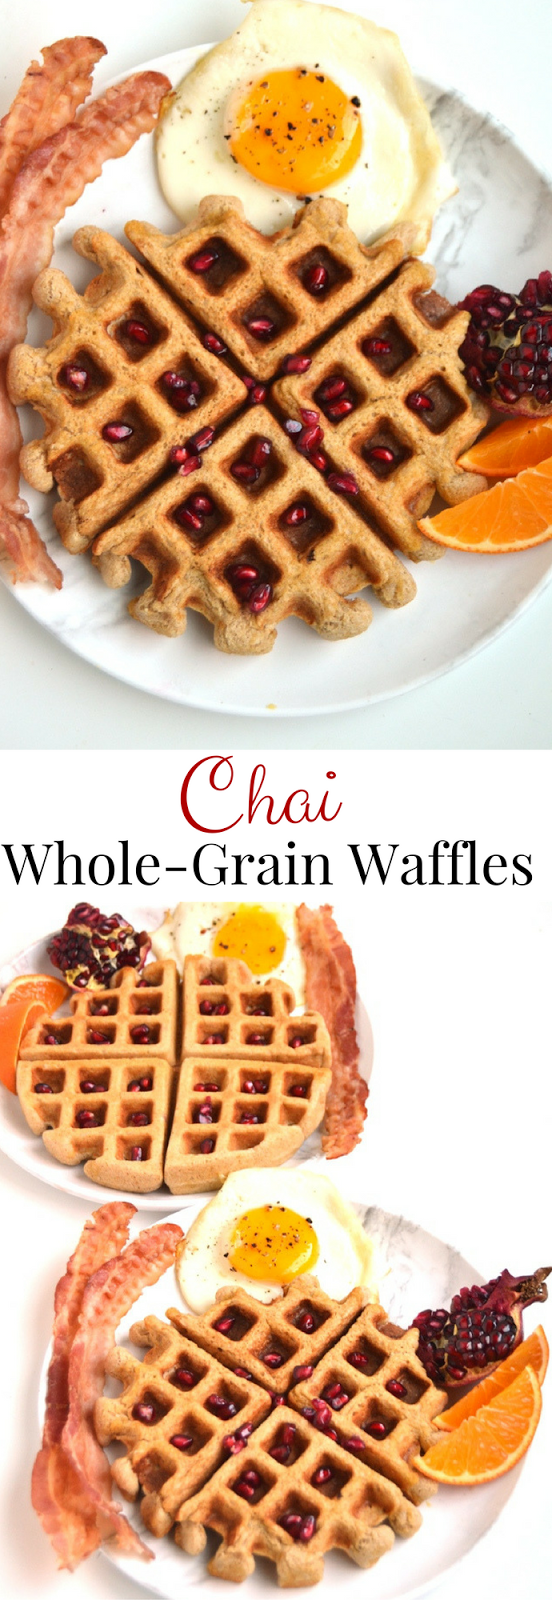 Chai Whole-Grain Waffles are whole-wheat yet are light and fluffy and are packed with protein ans fiber and delicious warm chai spices. They can be made ahead of time and reheat well in the toaster. www.nutritionistreviews.com